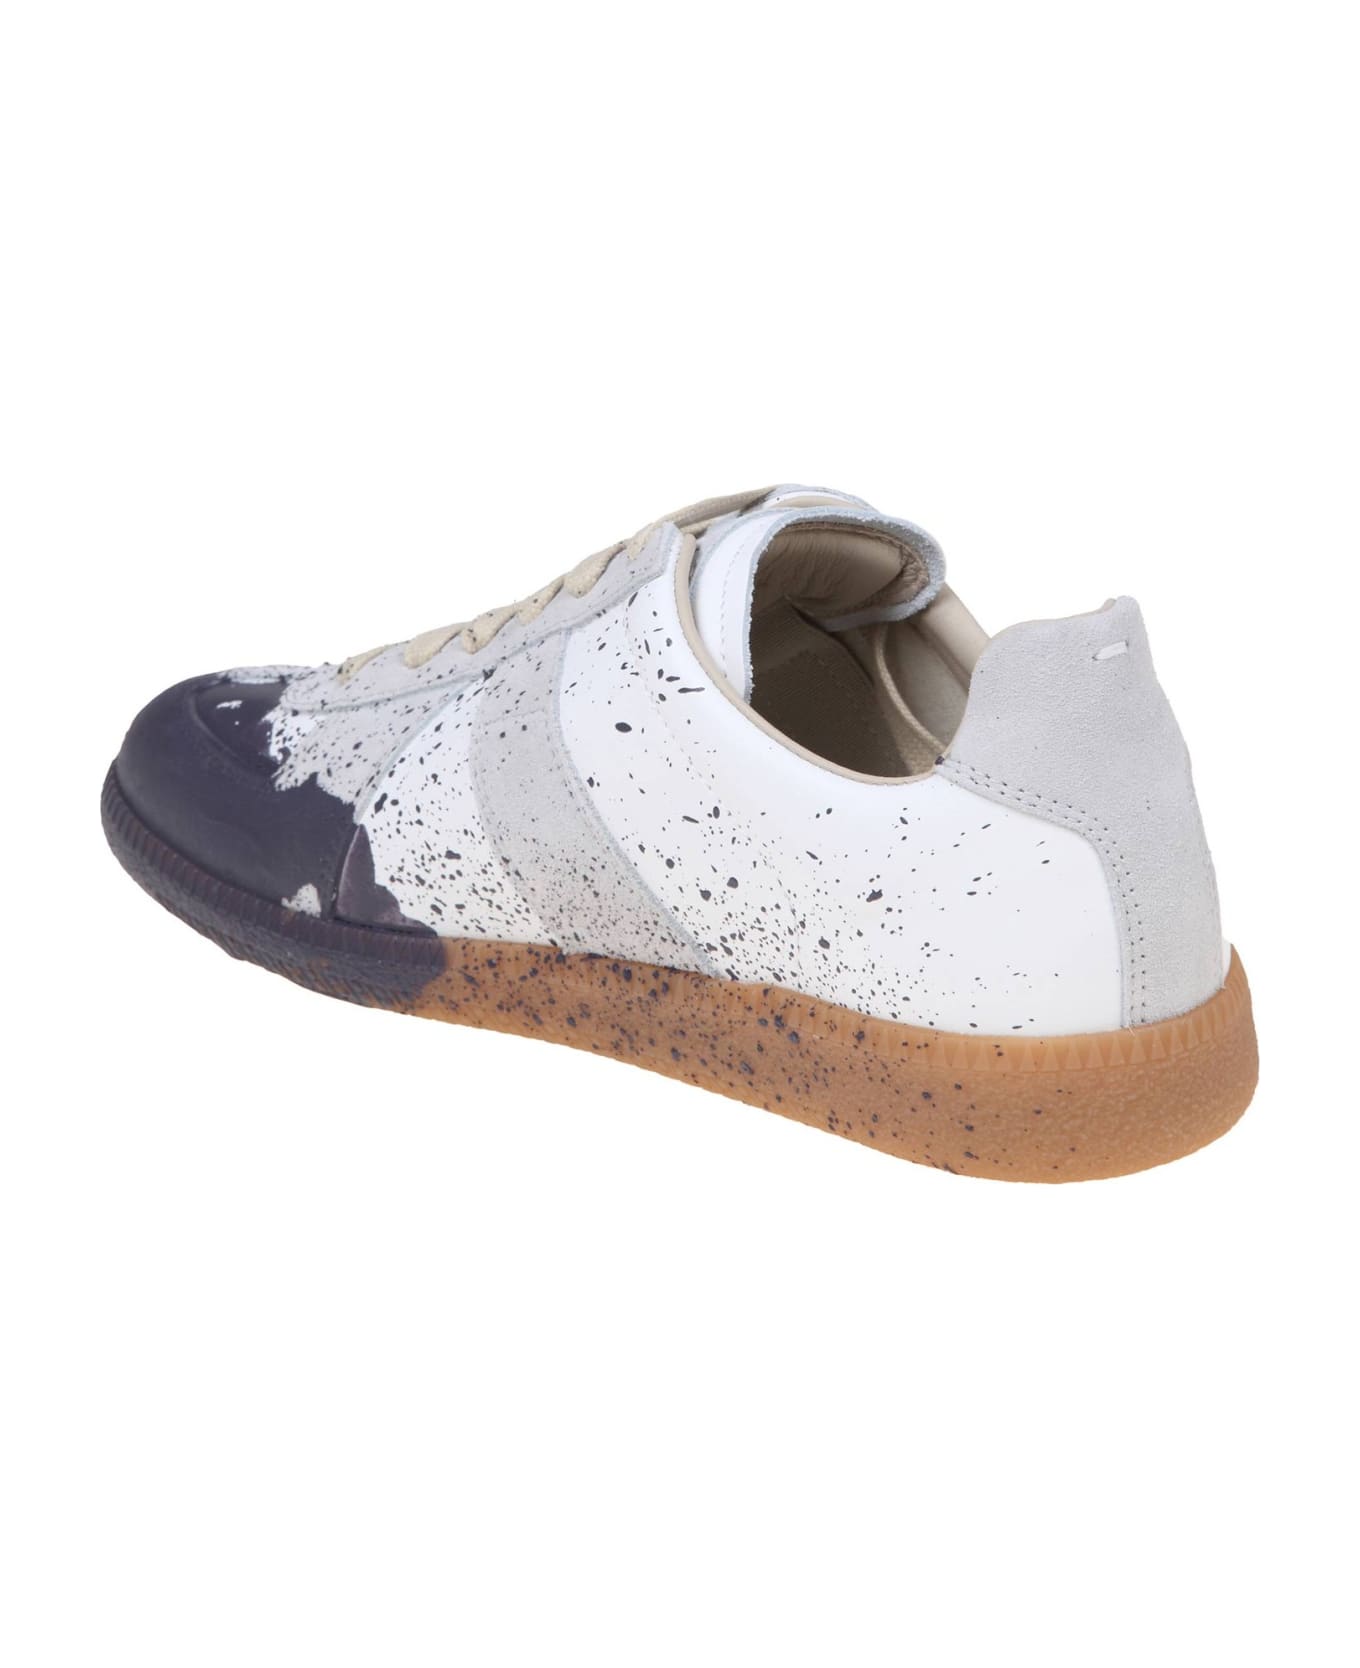 Maison Margiela Leather Sneakers With Paint Detail - White/Grey